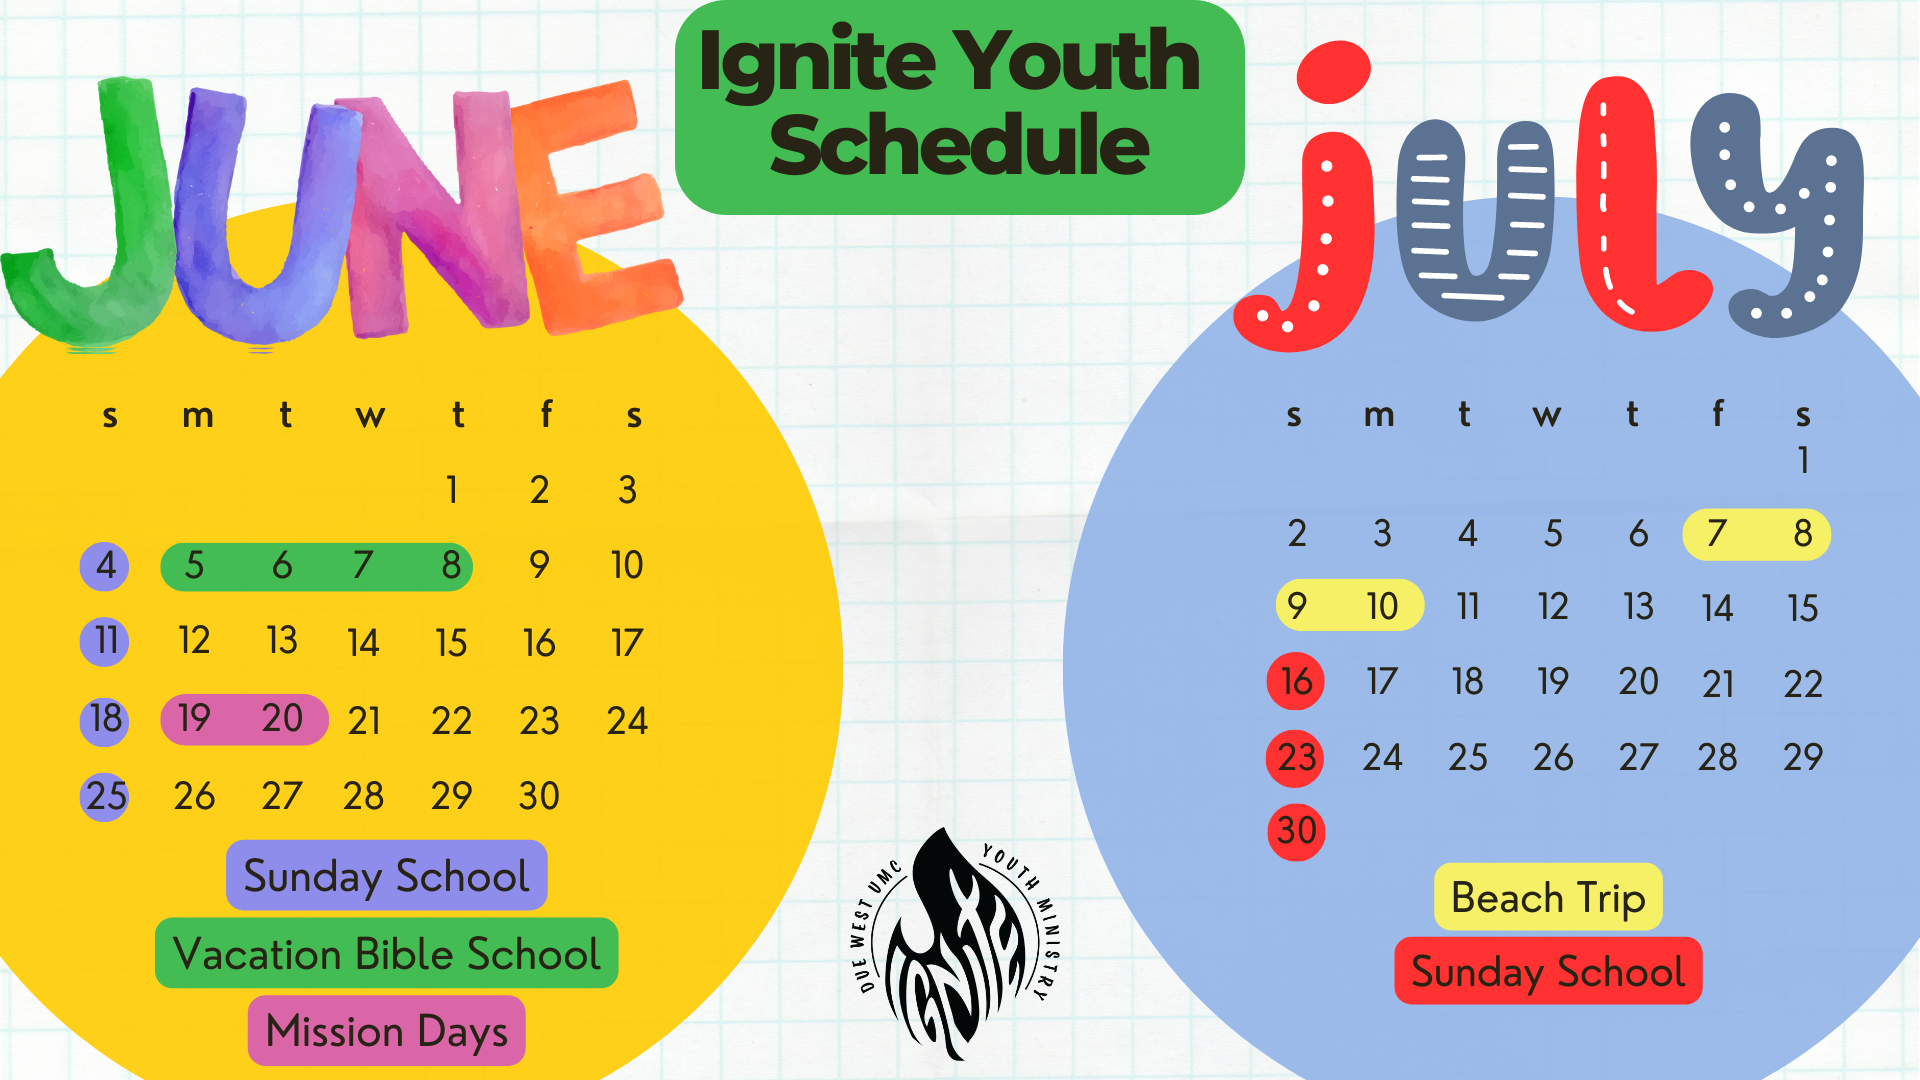 Ignite Dates May 7 - Legacy Ignite Senior Handprints & Recognition May 14 - No Ignite Happy Mother's Day May 21 - Step-Up Ignite Rising 6th Graders attend Ignite for 1st Time!.png